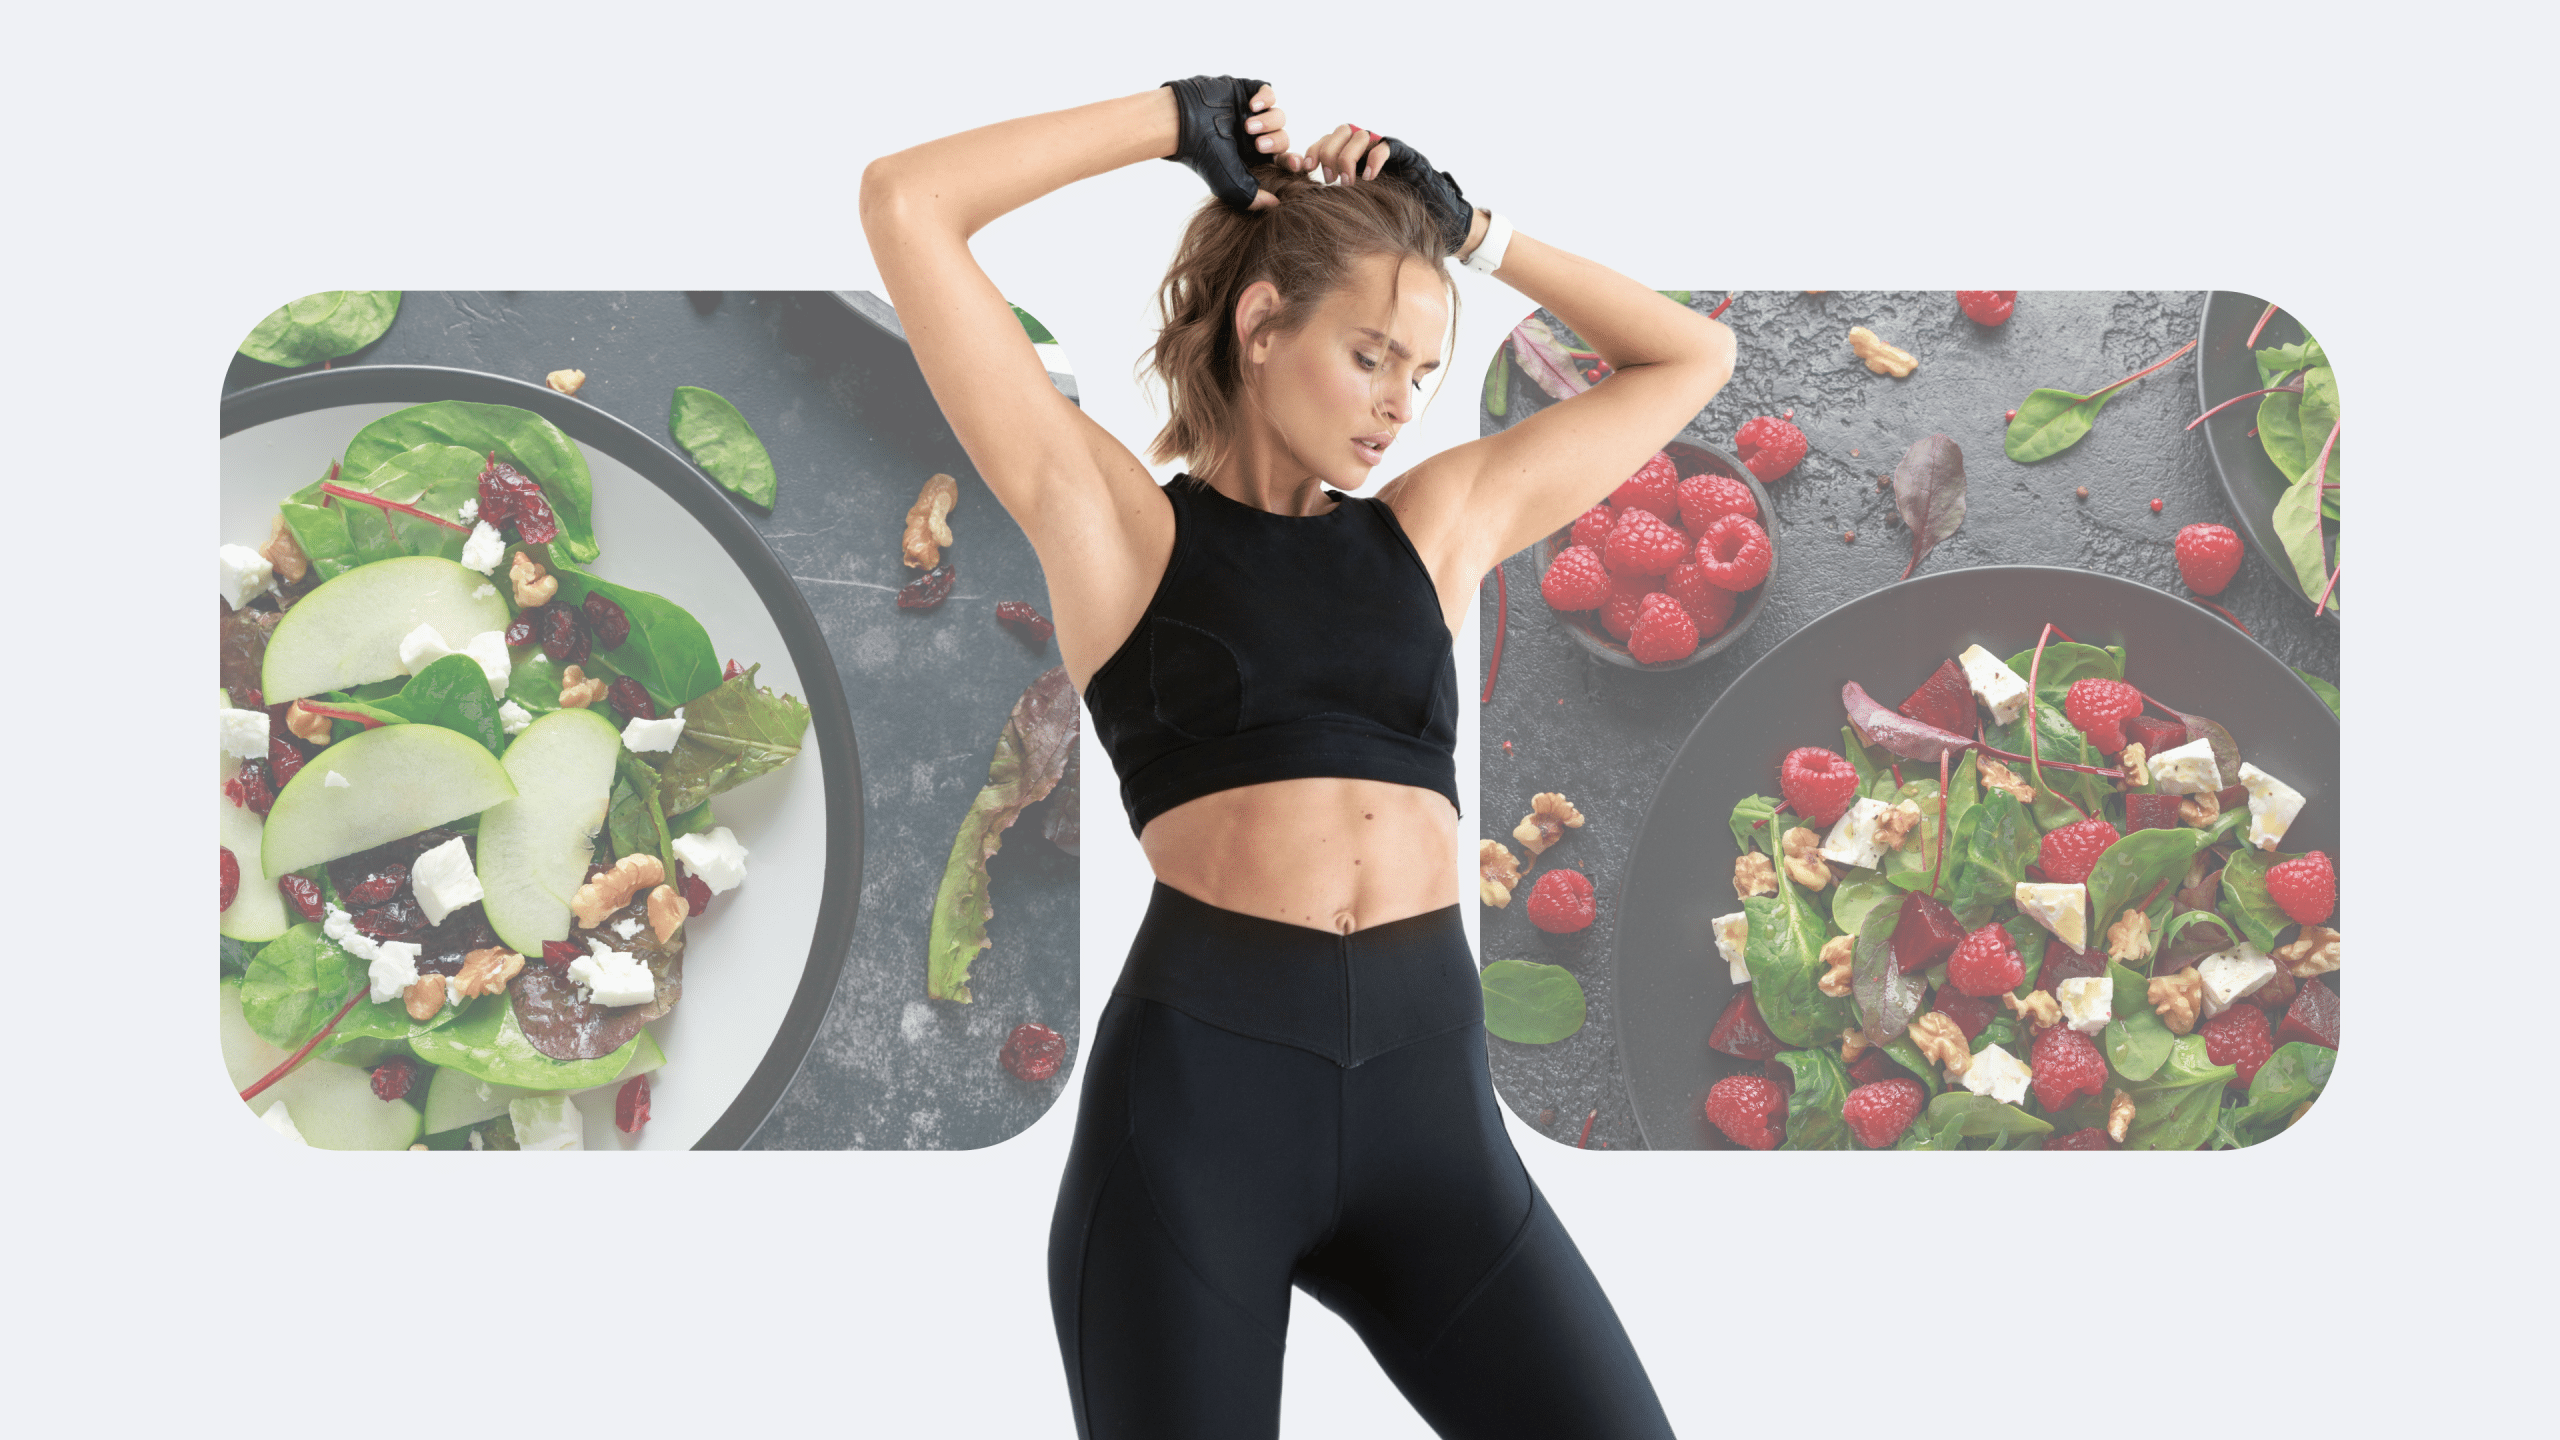 HOW I LOST 5 LBS IN ONE WEEK: WHAT I EAT IN A DAY TO LOSE WEIGHT